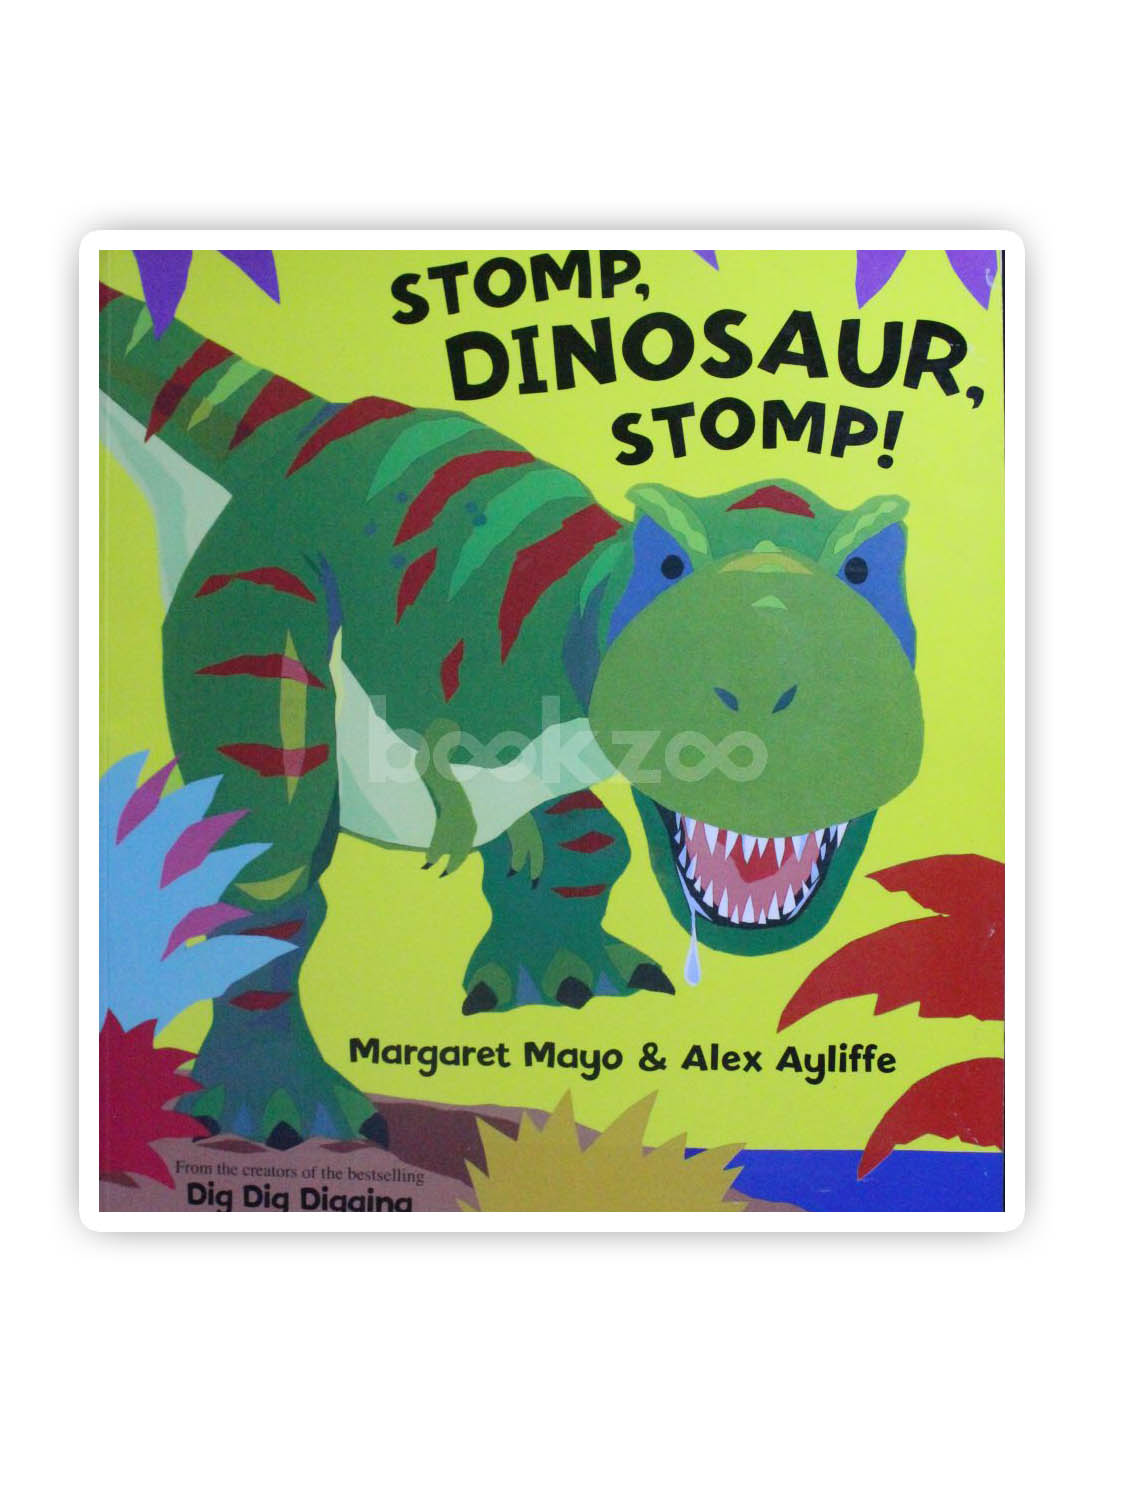 Book Reviews for Stomp, Dinosaur, Stomp! By Margaret Mayo and Alex